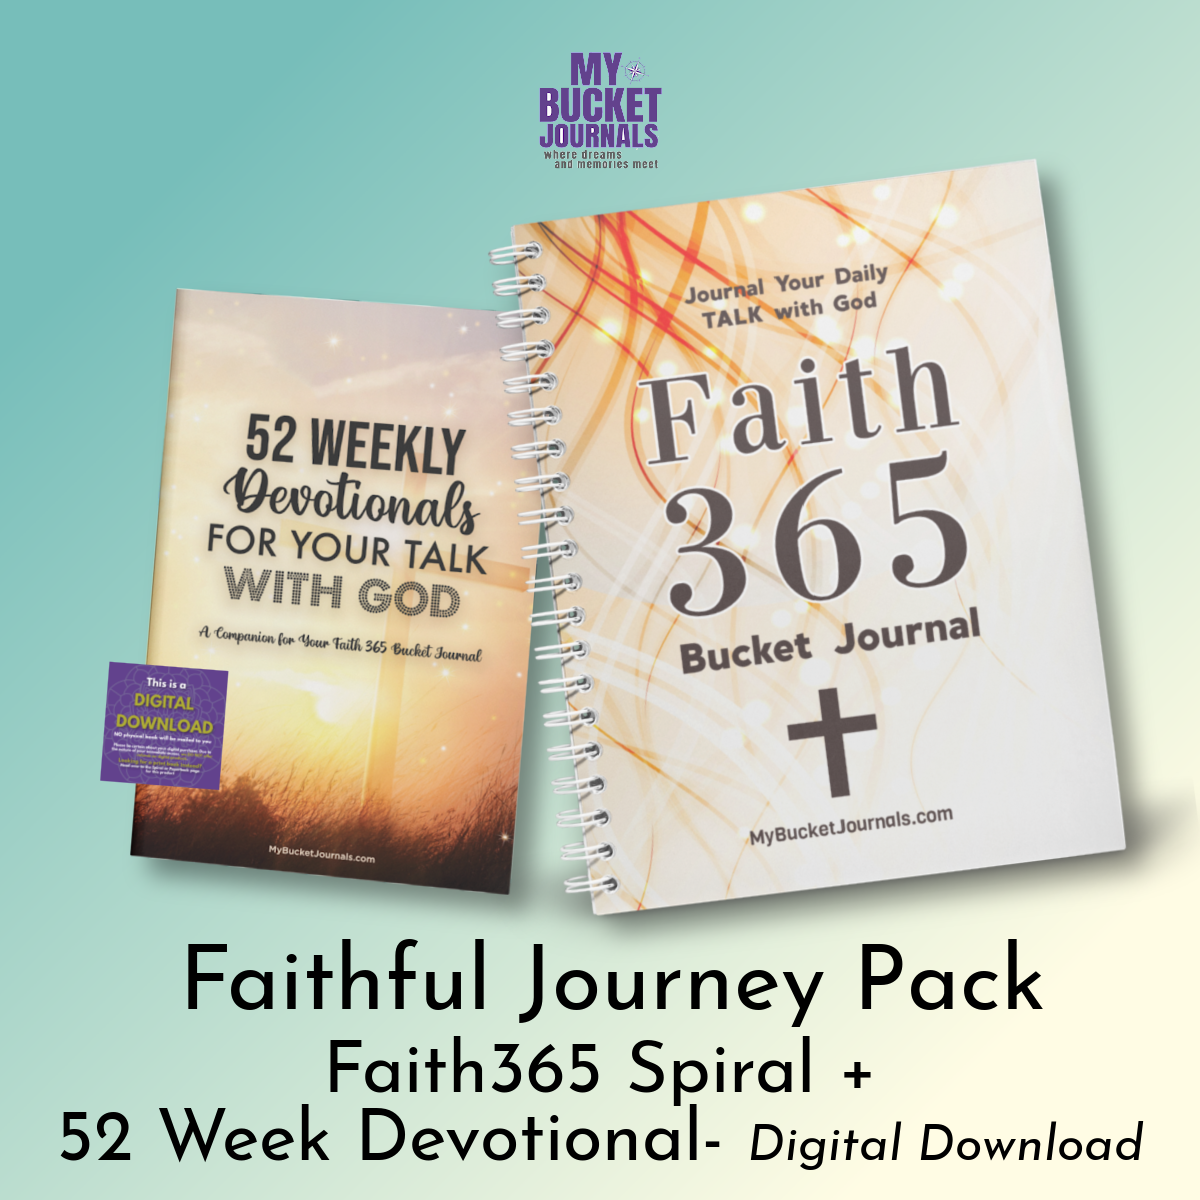 The Faithful Journey Pack - Spiral + Printable